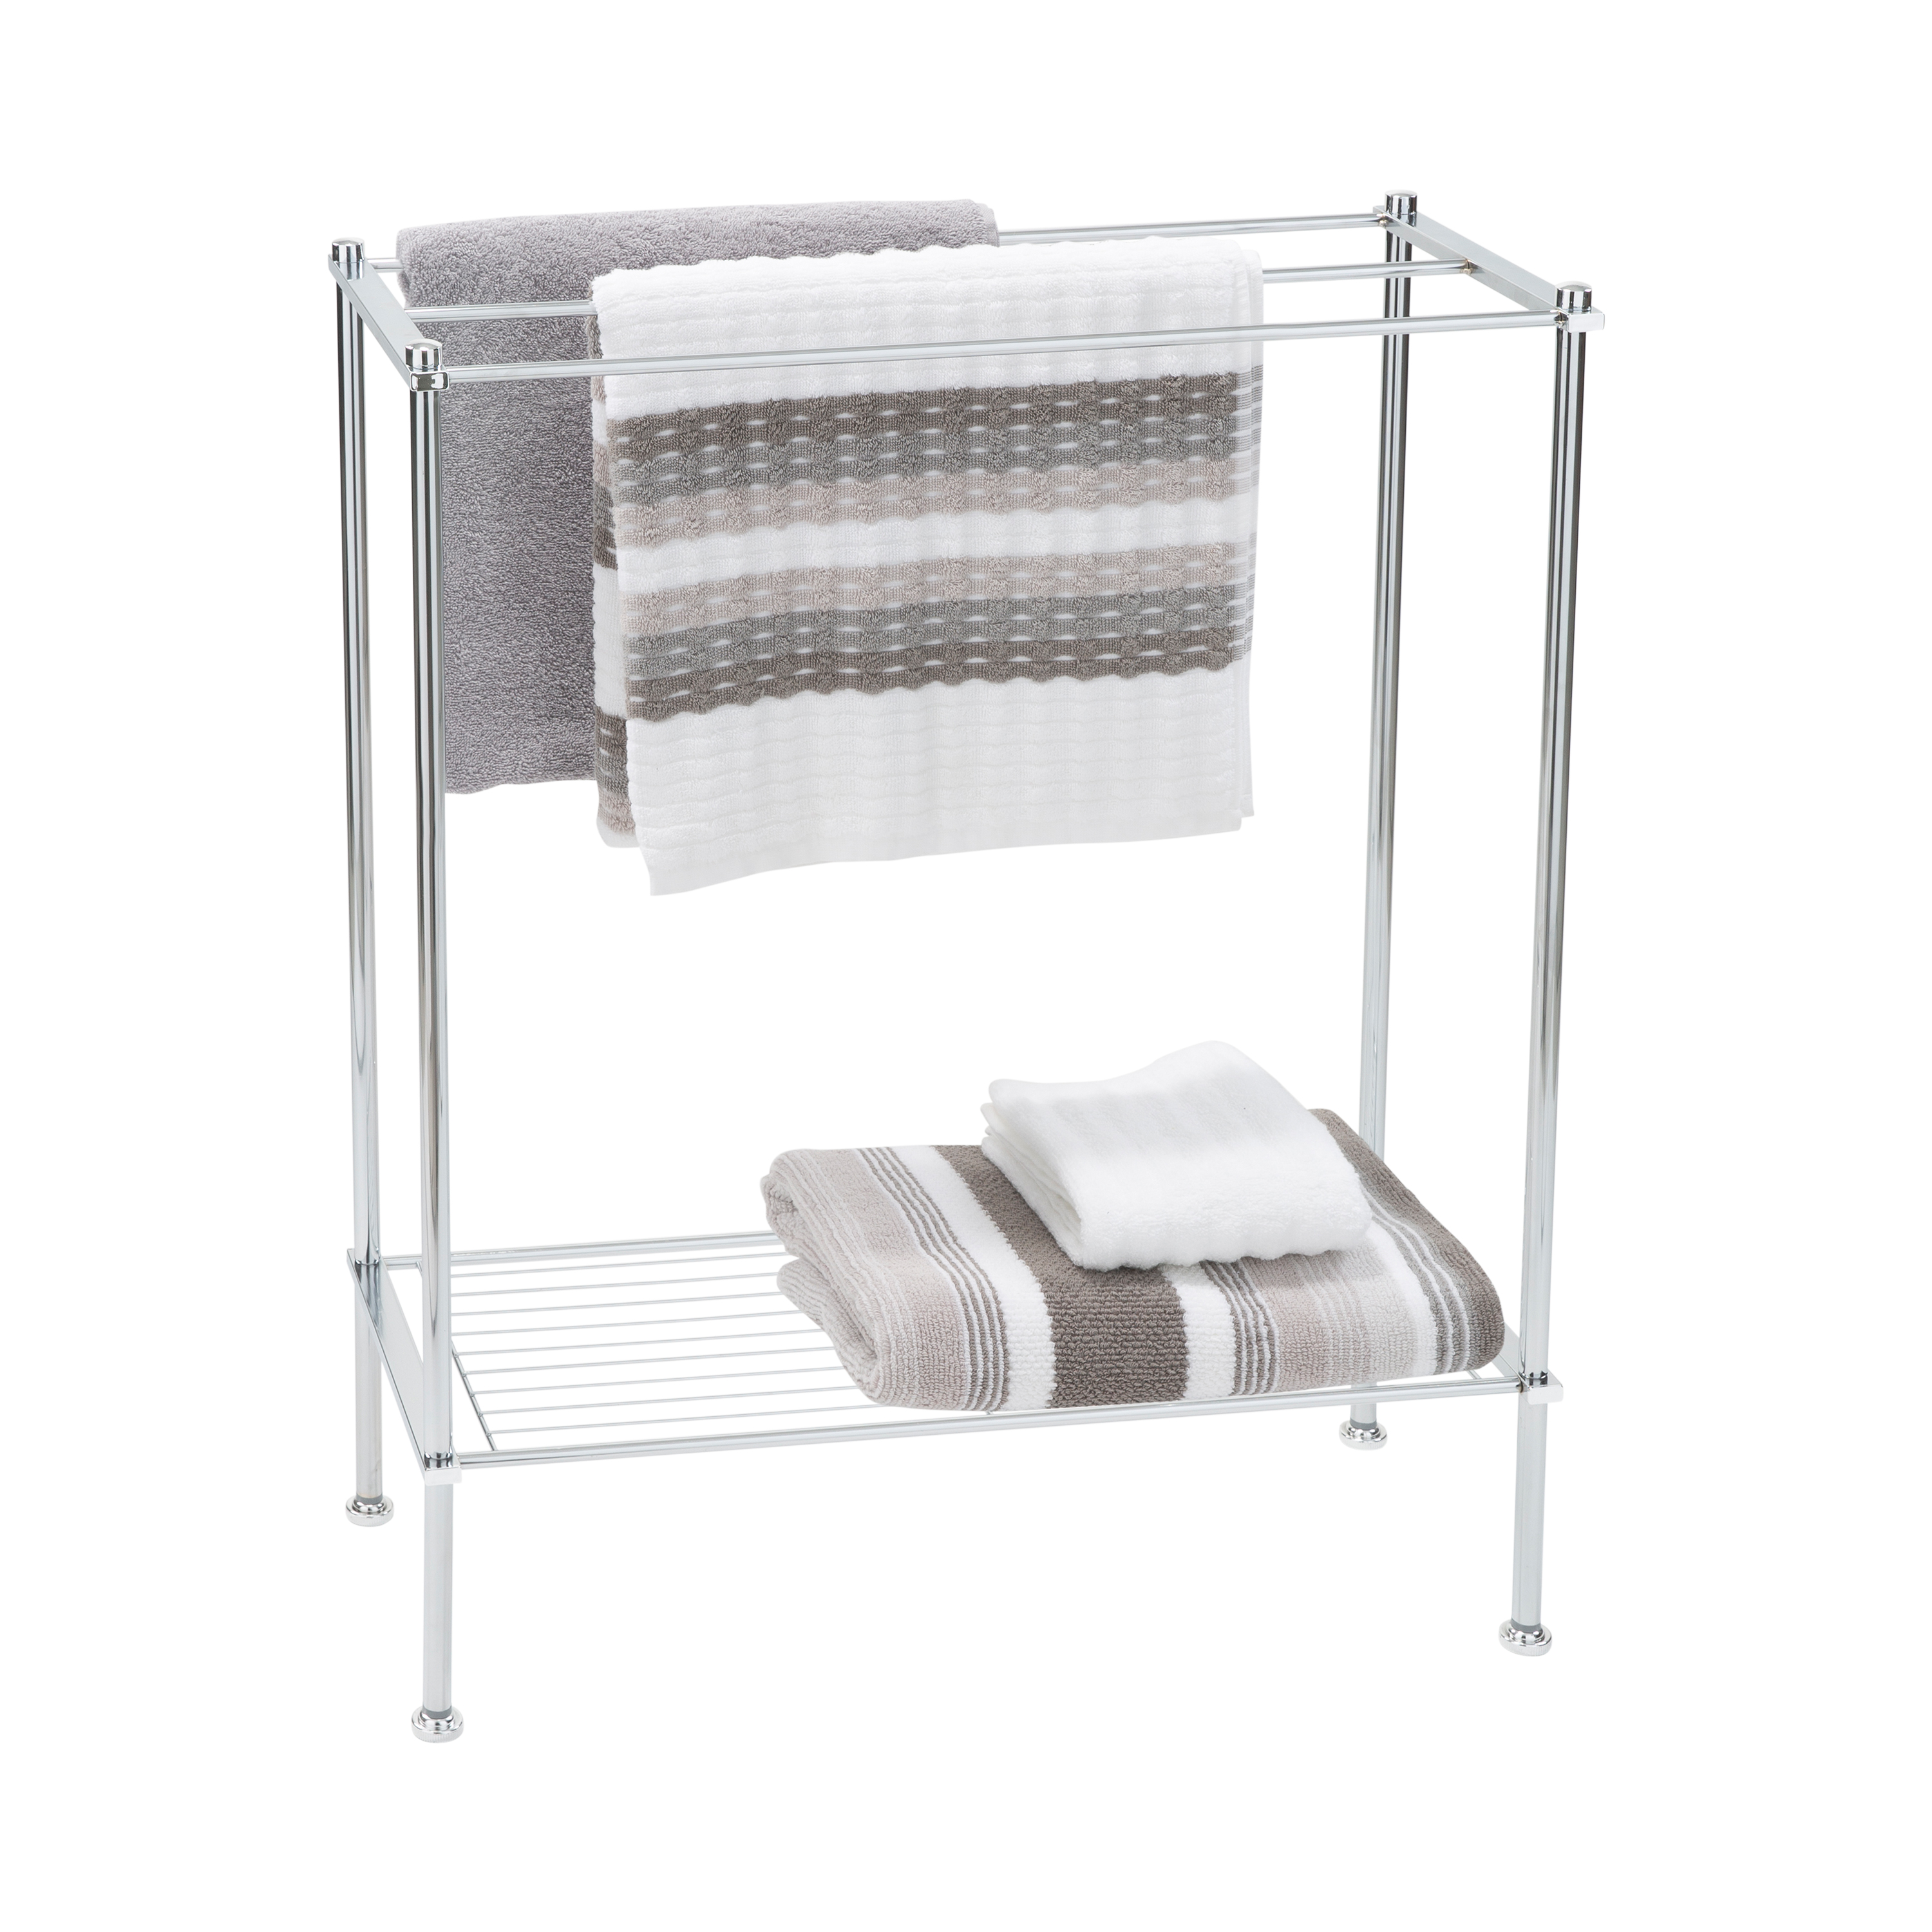 Organize It All Freestanding Metal Towel Rack in Chrome - image 4 of 7